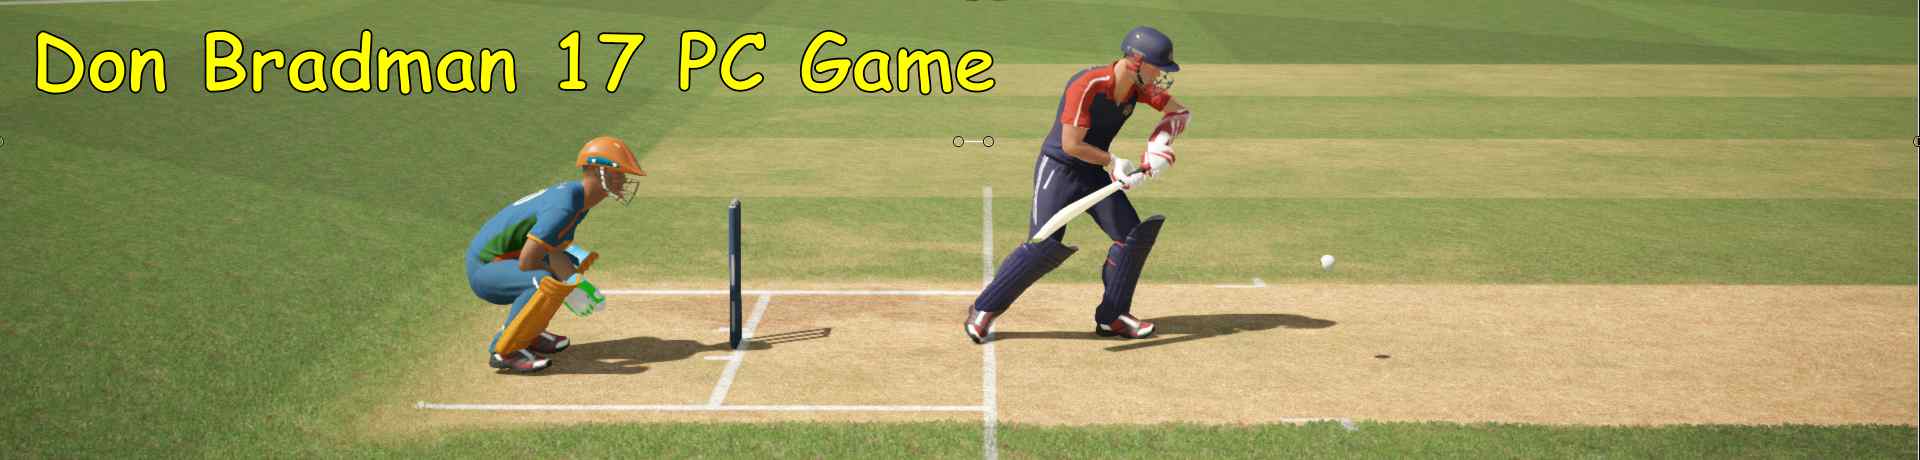 Download Highly Compressed Full Version Don Bradman 17 game in 7.18 GB for desktop or laptop in part wise